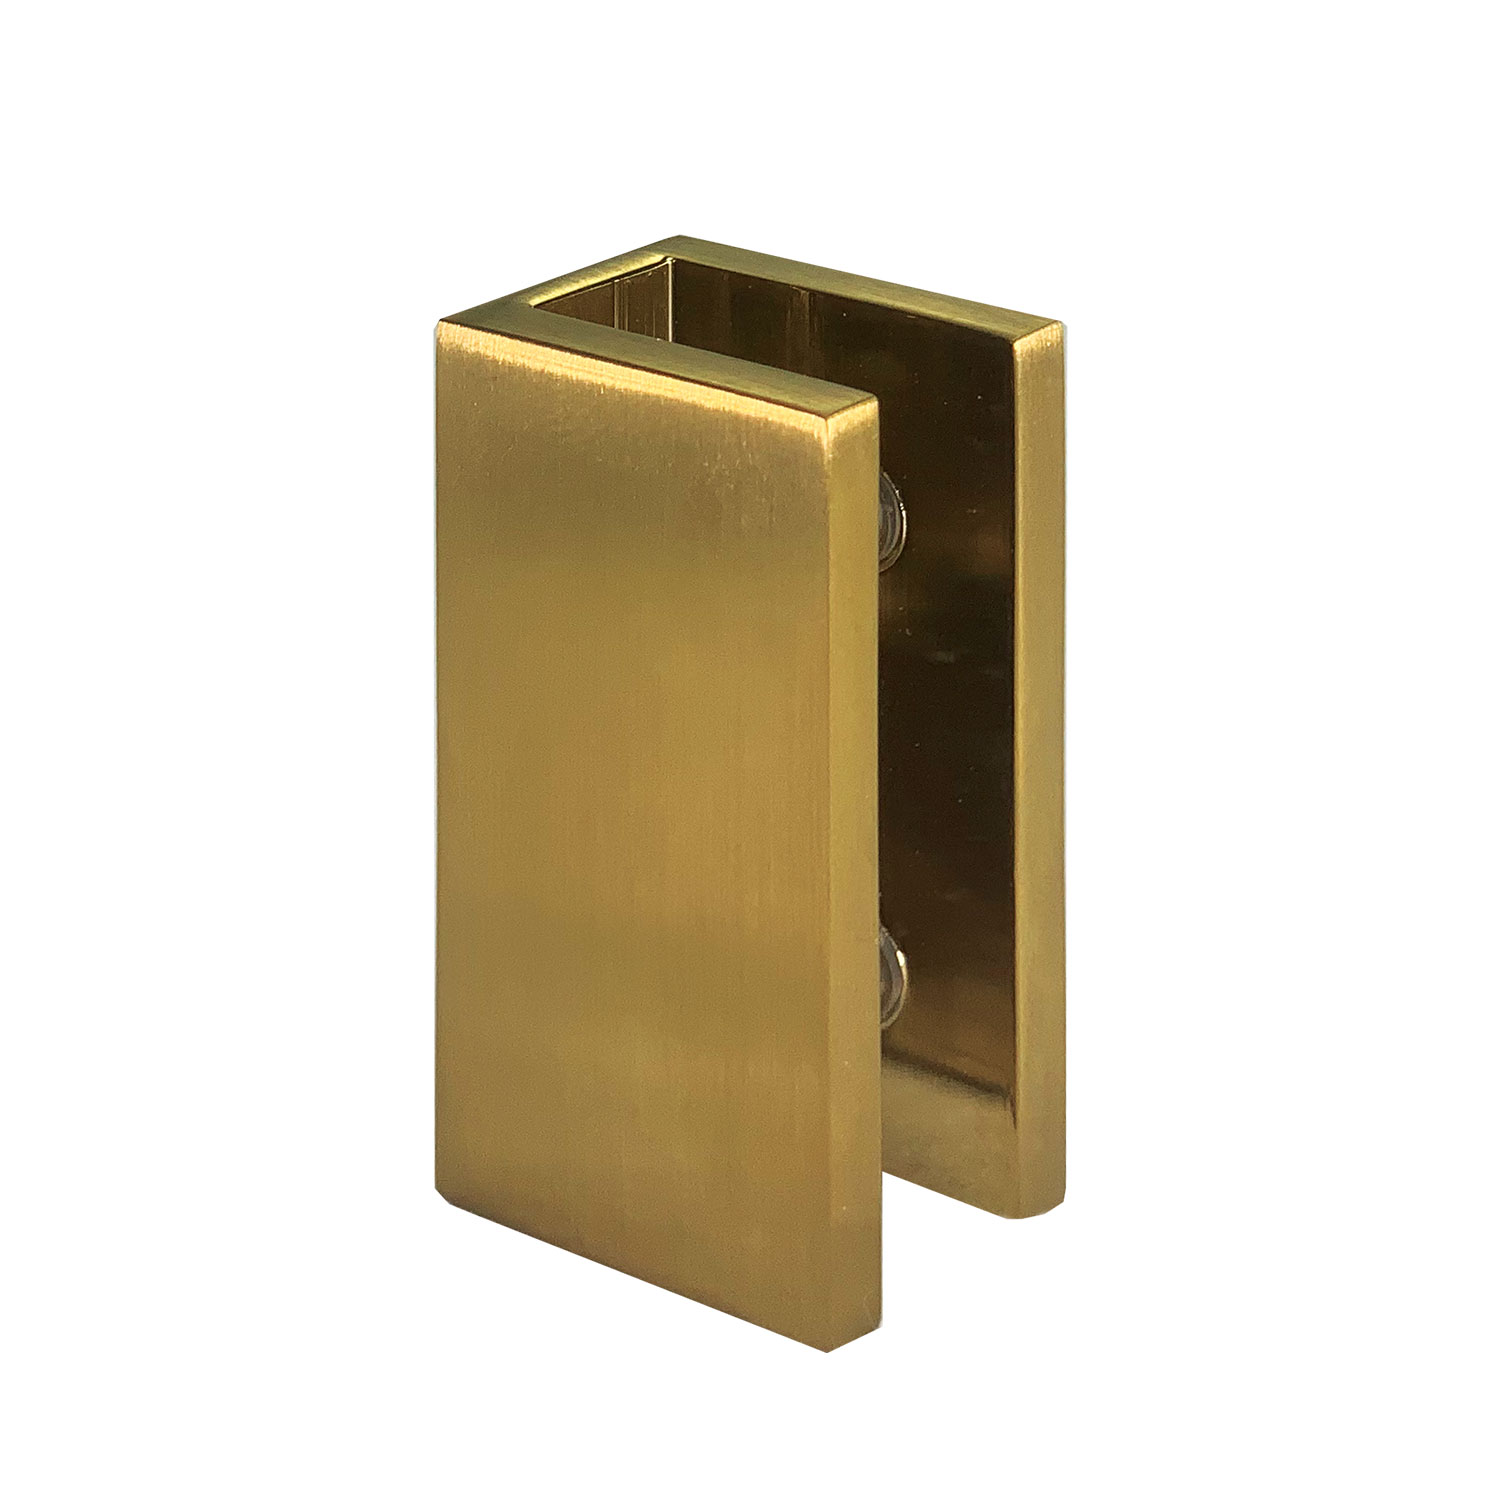  GLASS TO WALL U-CLAMP 25MM X 50MM - SQUARE SERIES (BRUSHED BRASS)